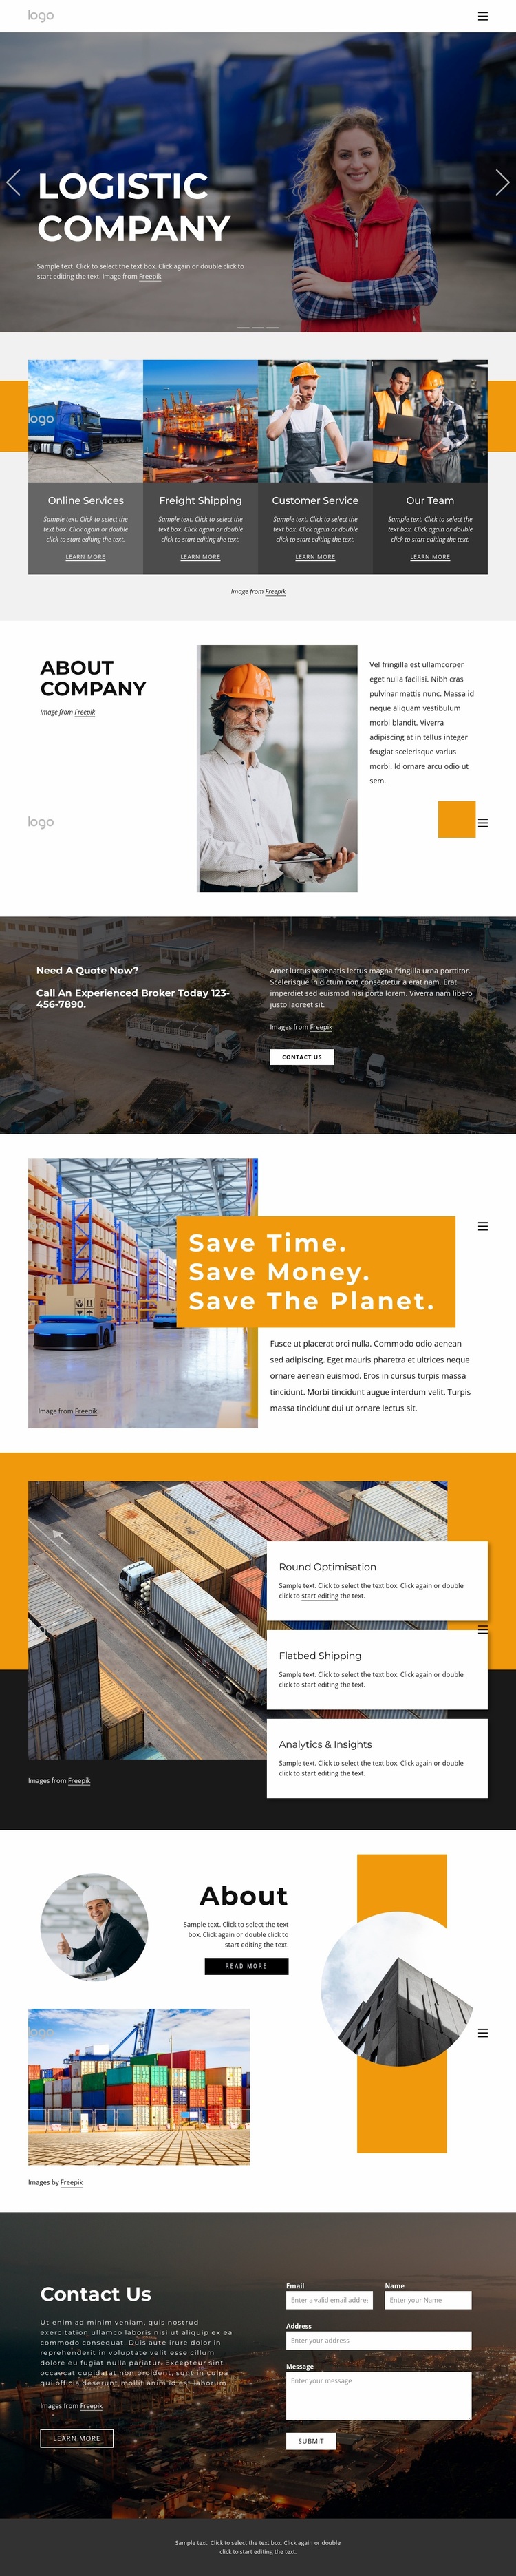 Shipping services and logistics Website Design